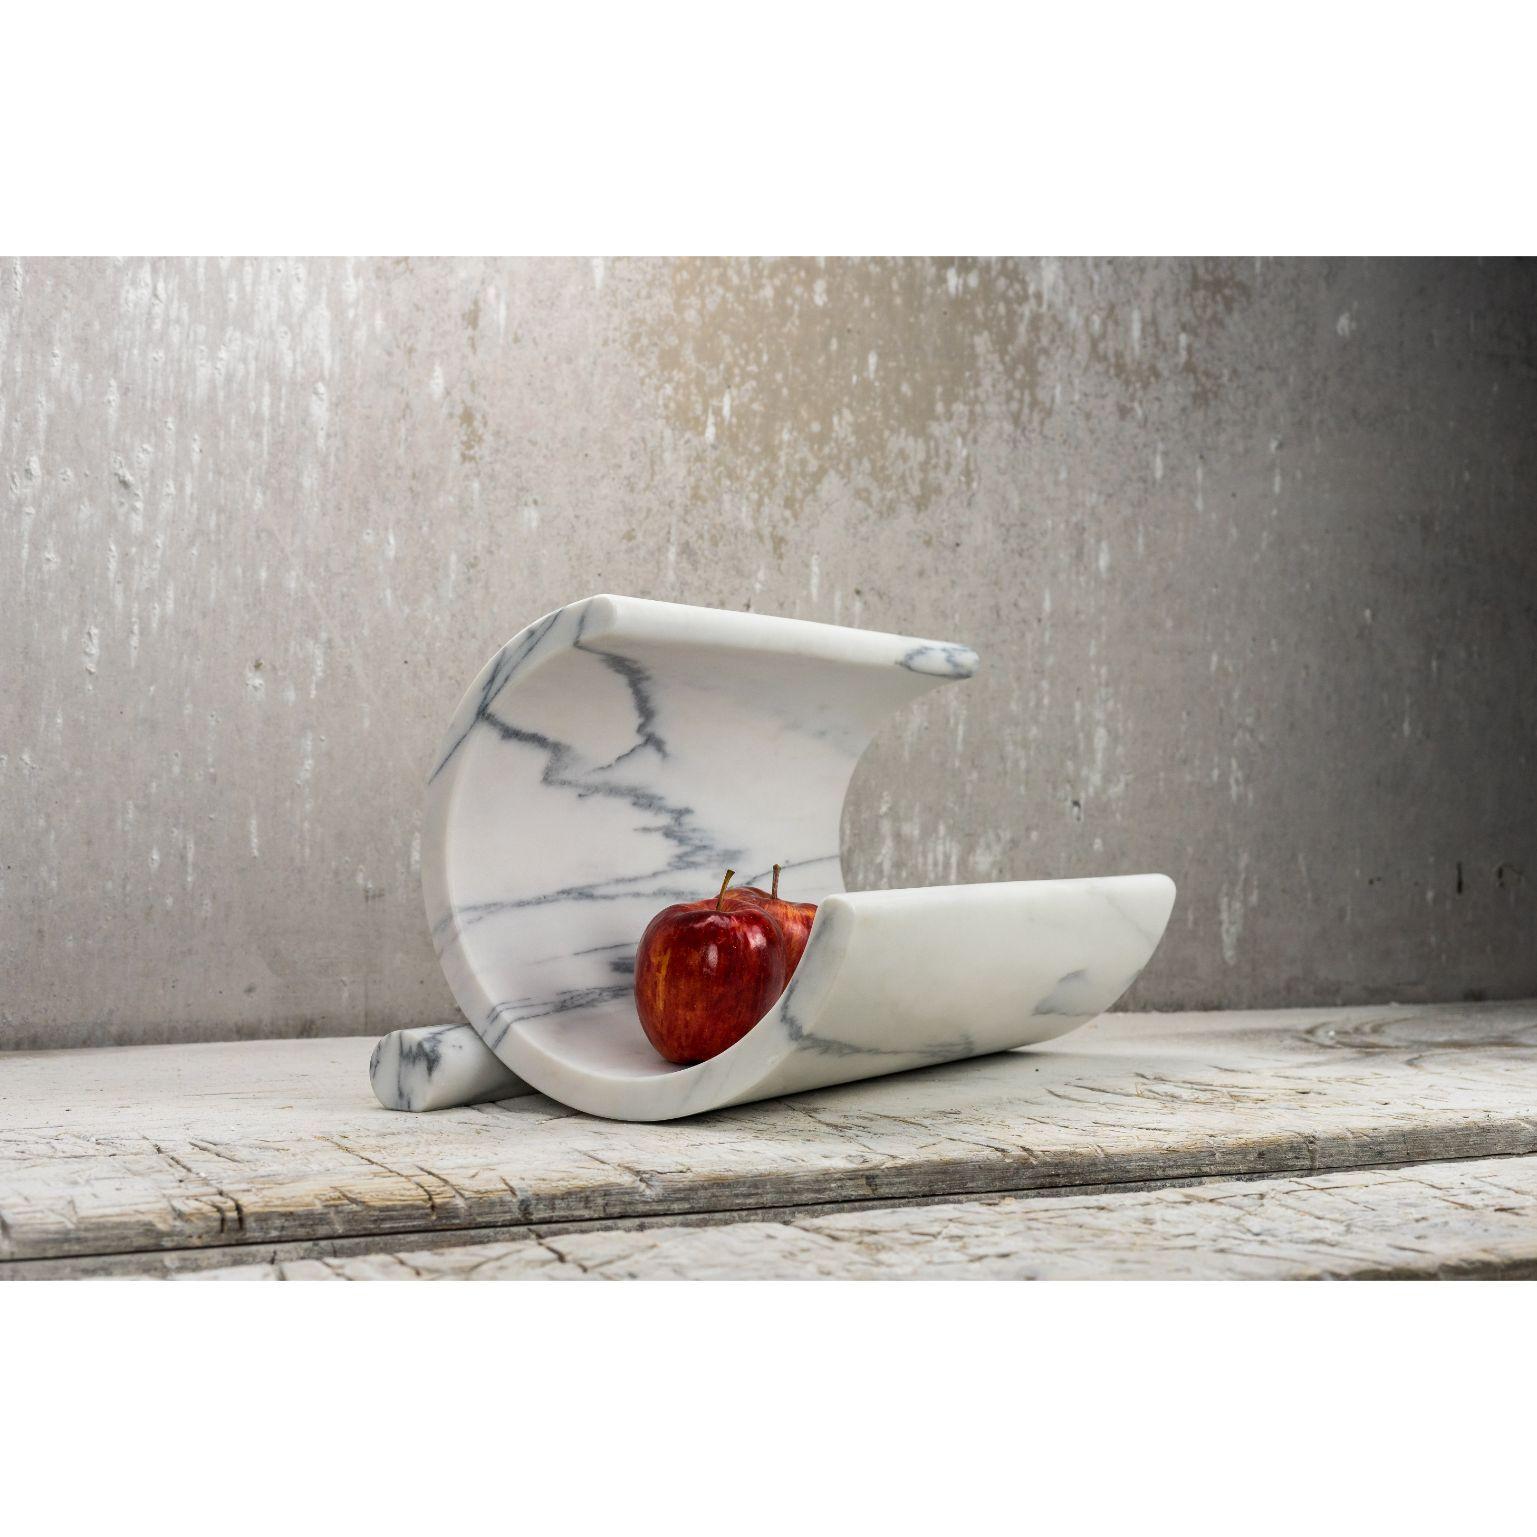 Balanced Marble Fruit Bowl by Essenzia
Materials: Carrara, pele de tigre, estremoz white
Dimensions: 25 x 40 cm

Sculptural hand-finished fruit bowl made from a solid piece of marble. It´s an elegant object that can be used as a fruit container or